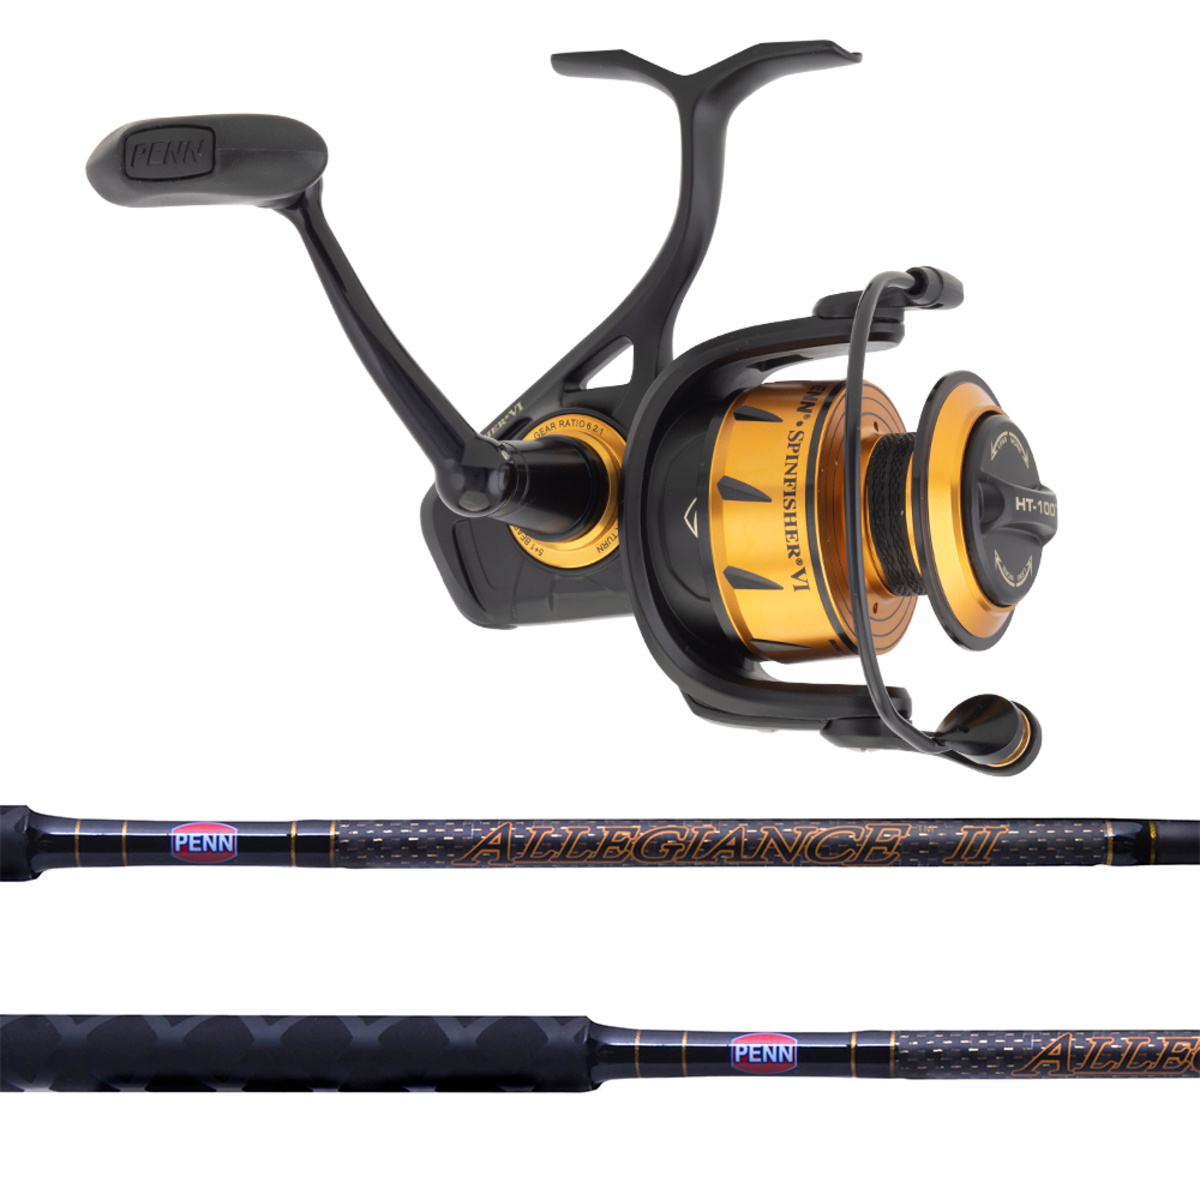 FOR SALE Penn 8500 ss and Penn 7500 ss rod and reel combos - The